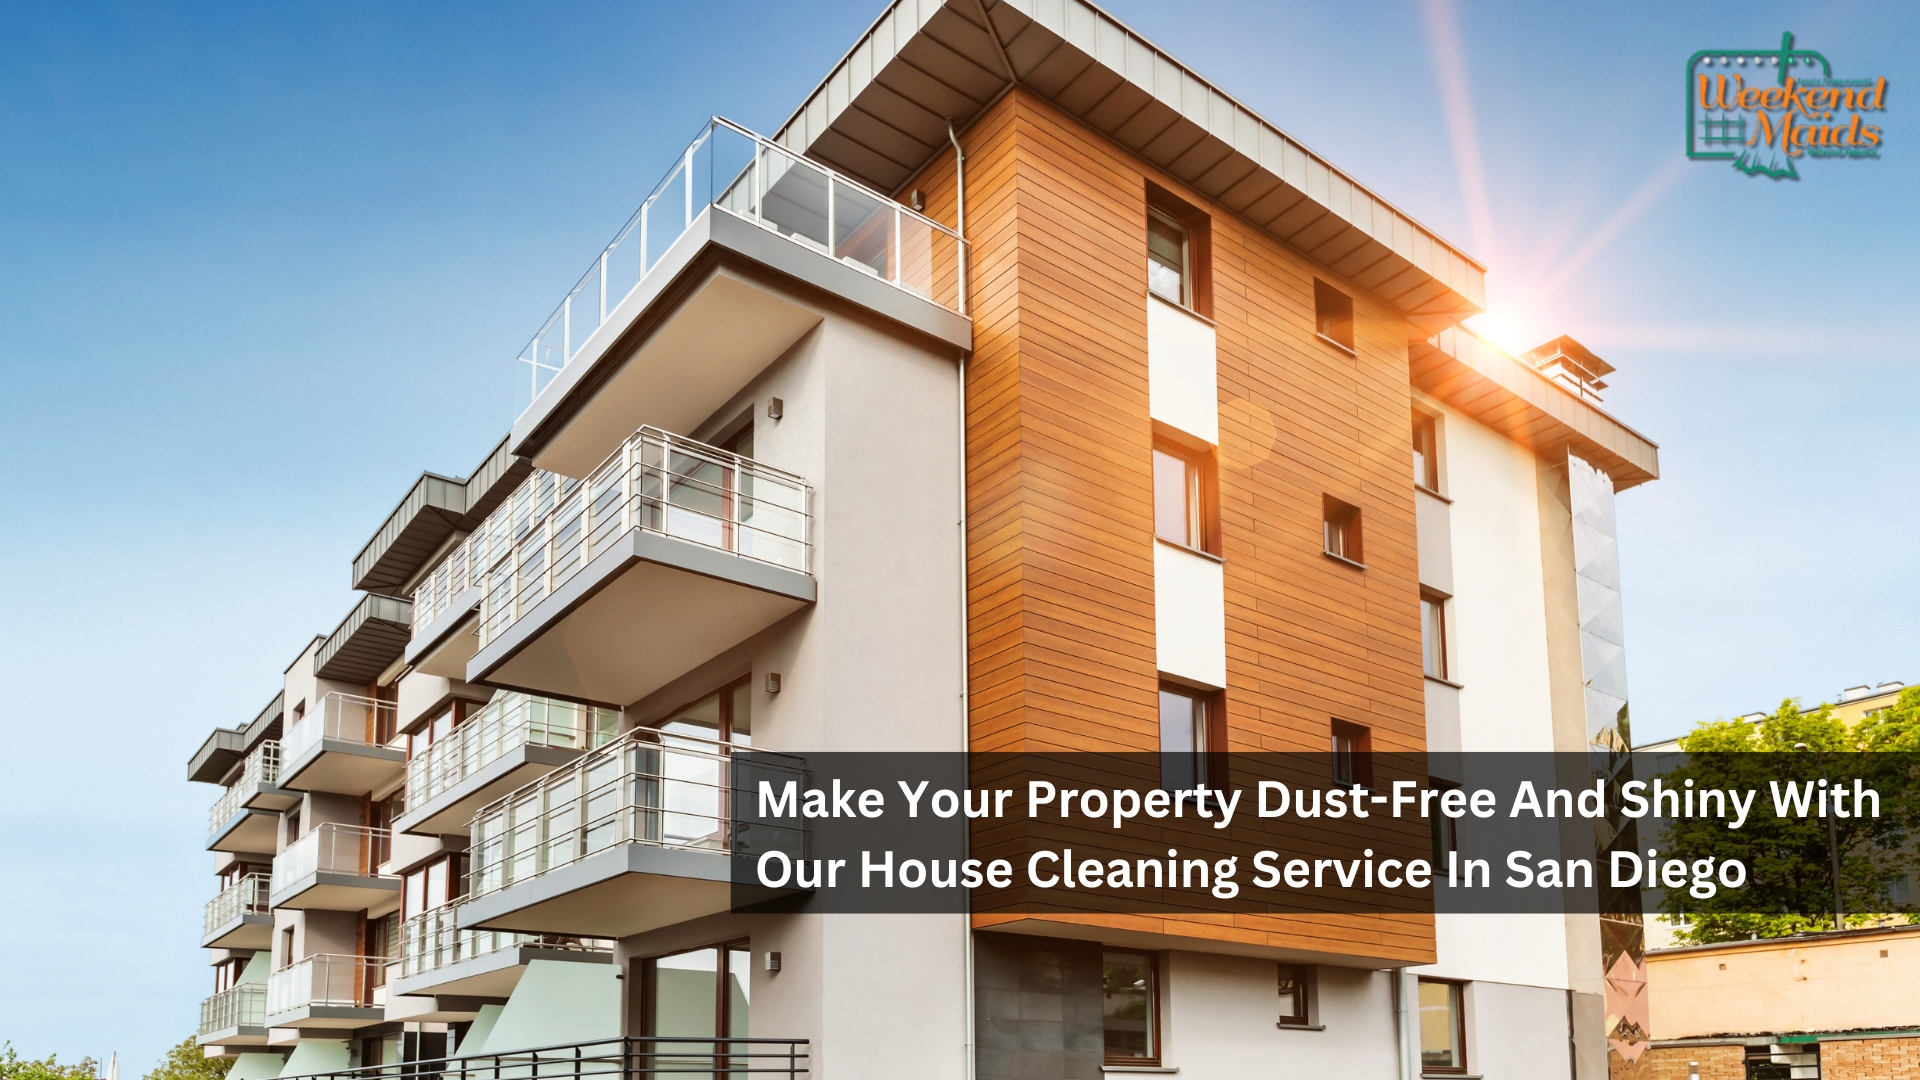 Make Your Property Dust-Free And Shiny With Our House Cleaning Service In San Diego